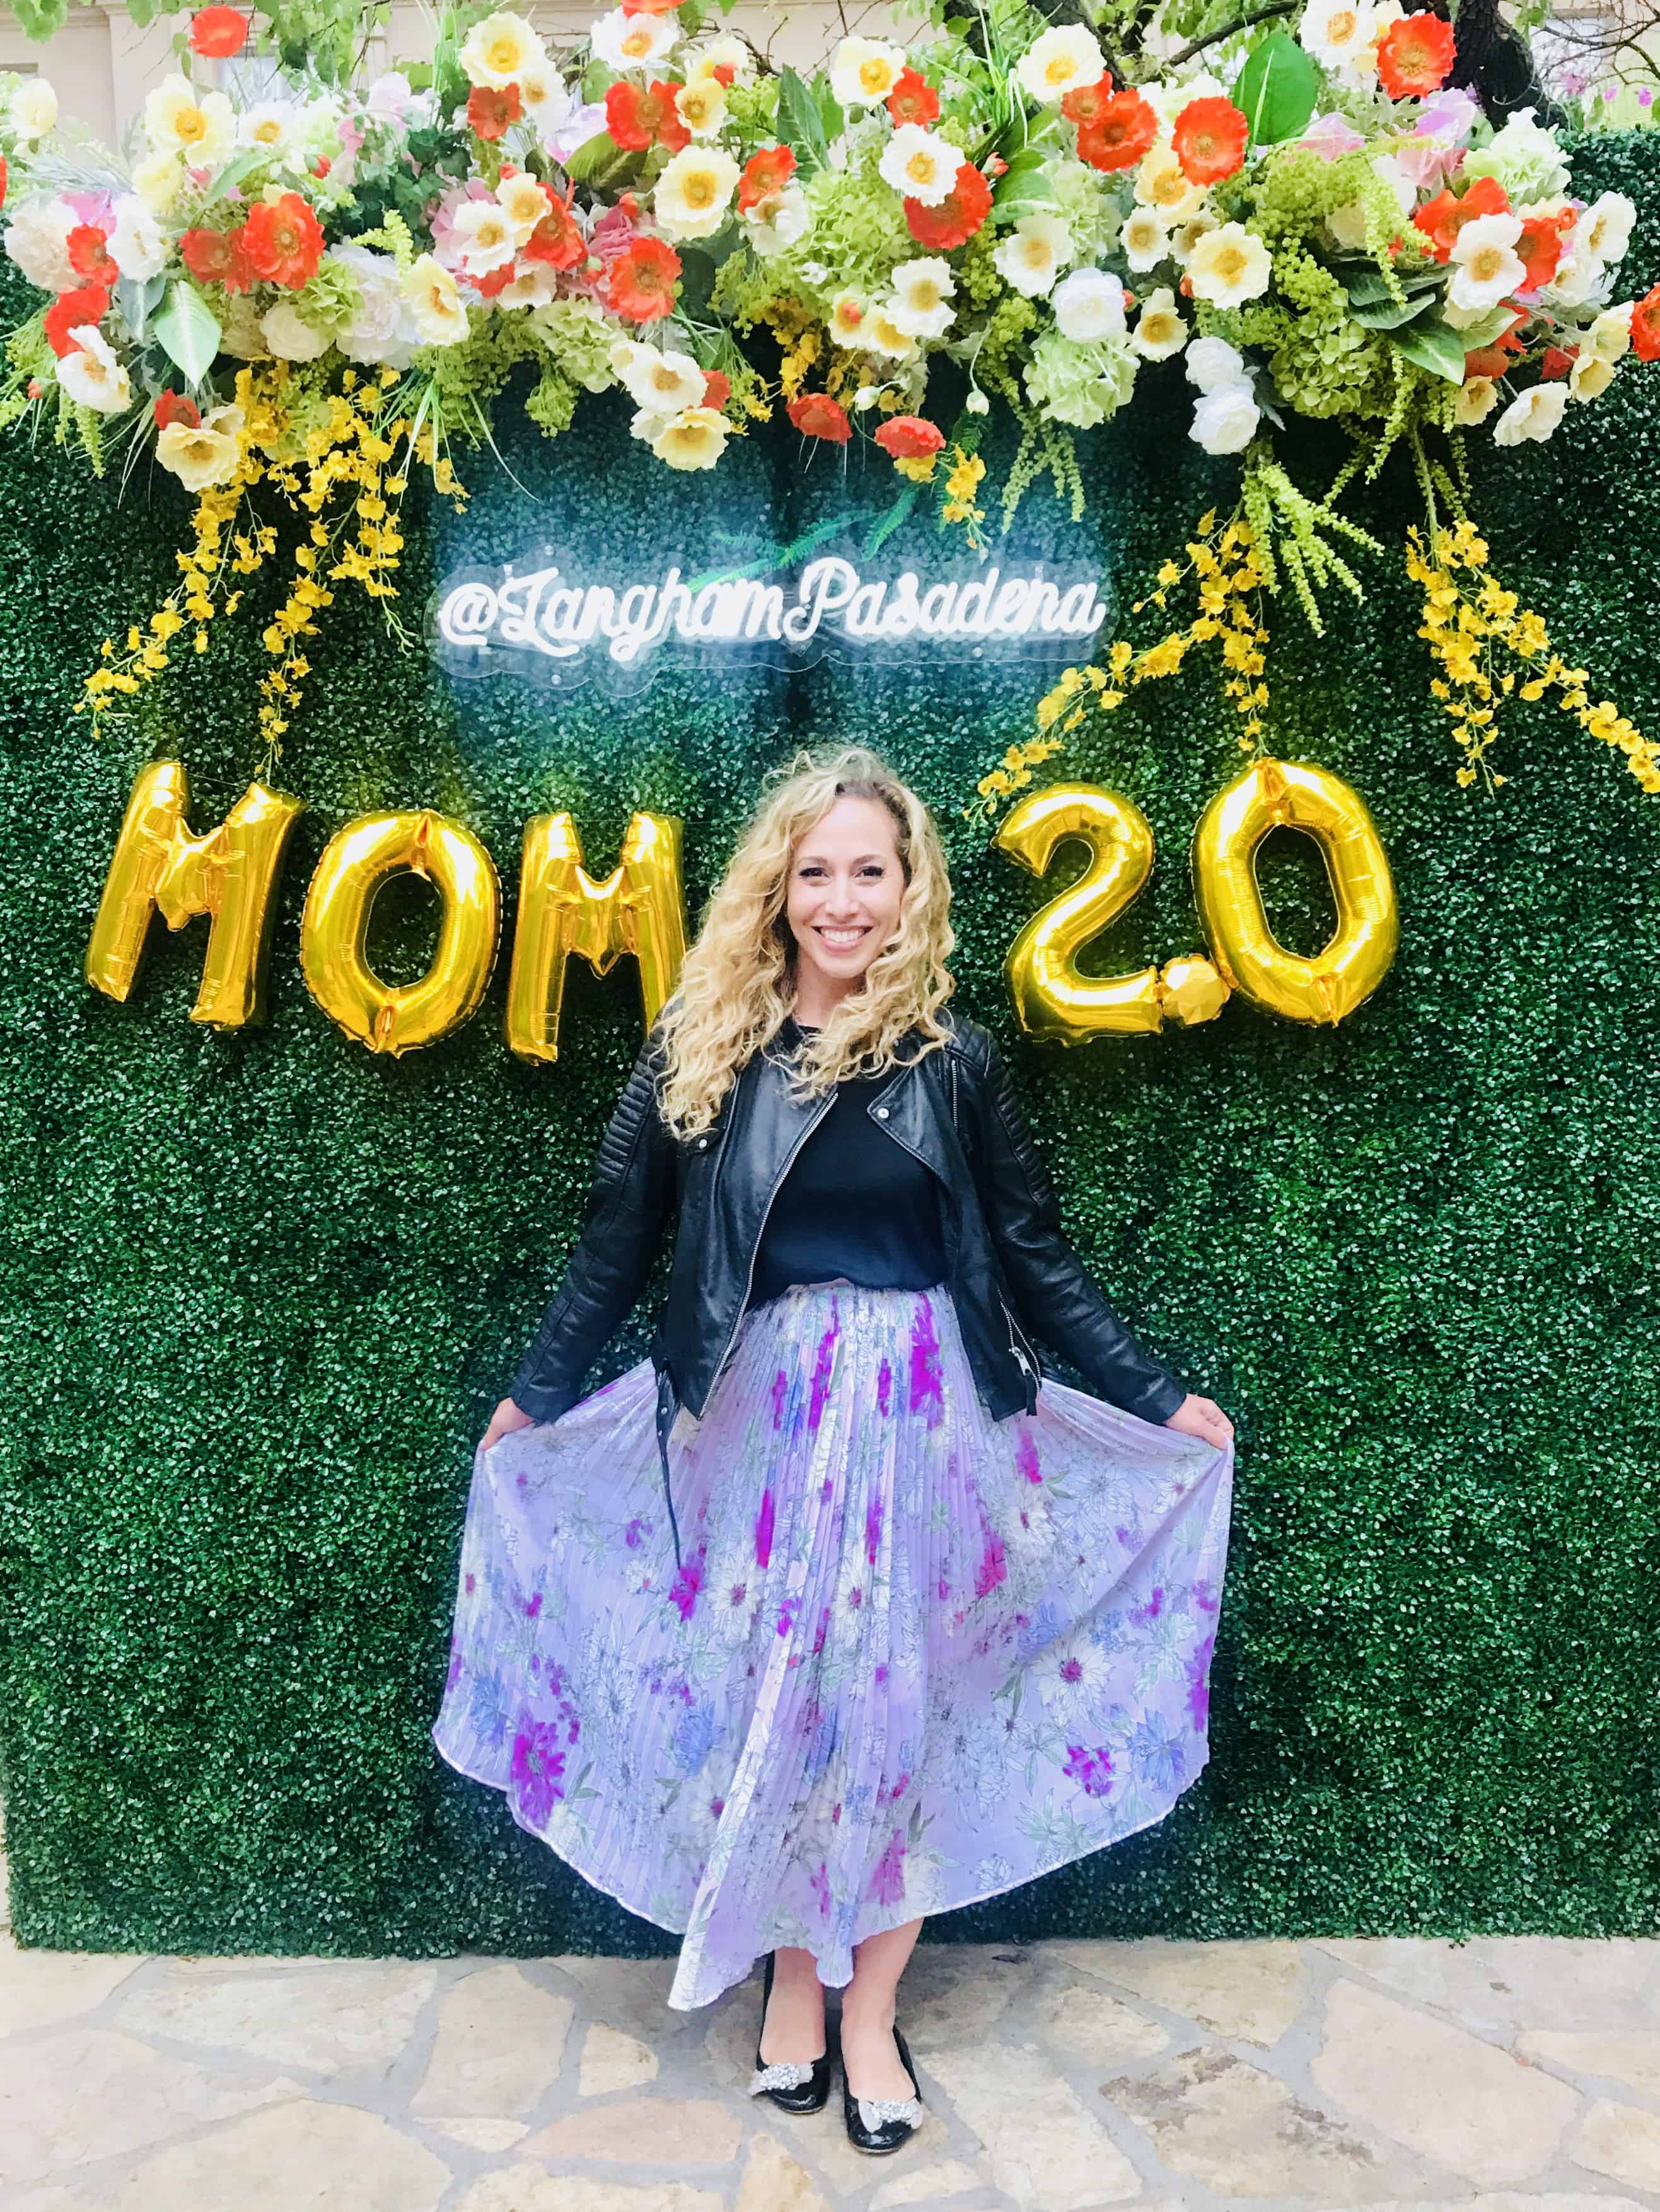 No, Blogging Is Not Dead And Other Things I Learned At Mom 2.0 Summit